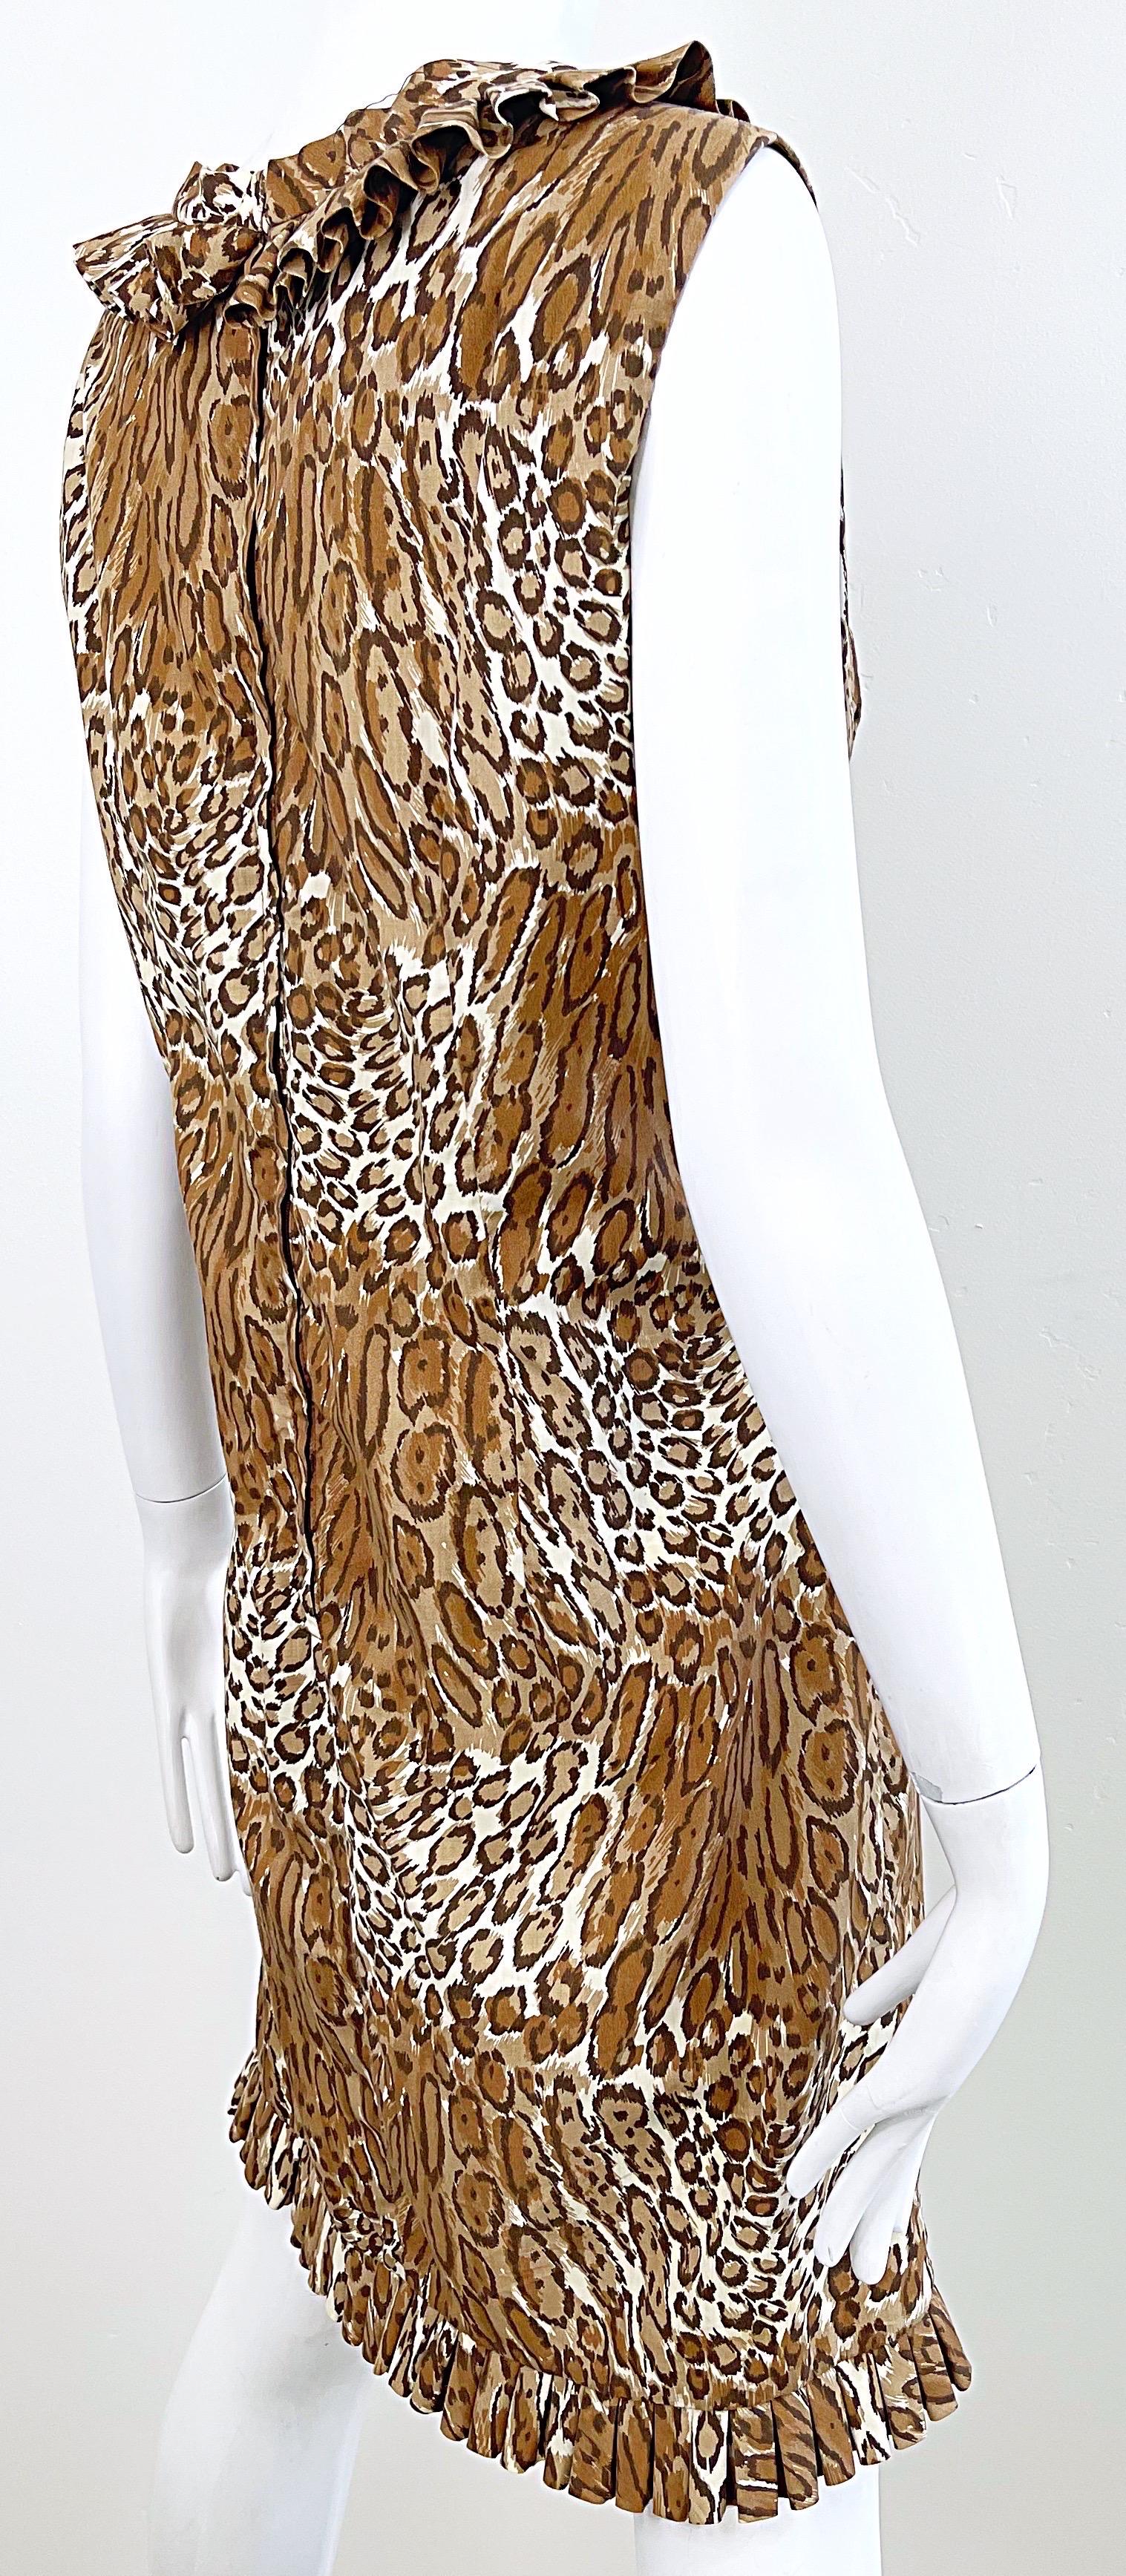 1960s Chic Leopard Cheetah Animal Abstract Print Cotton Vintage 60s Shift Dress 3